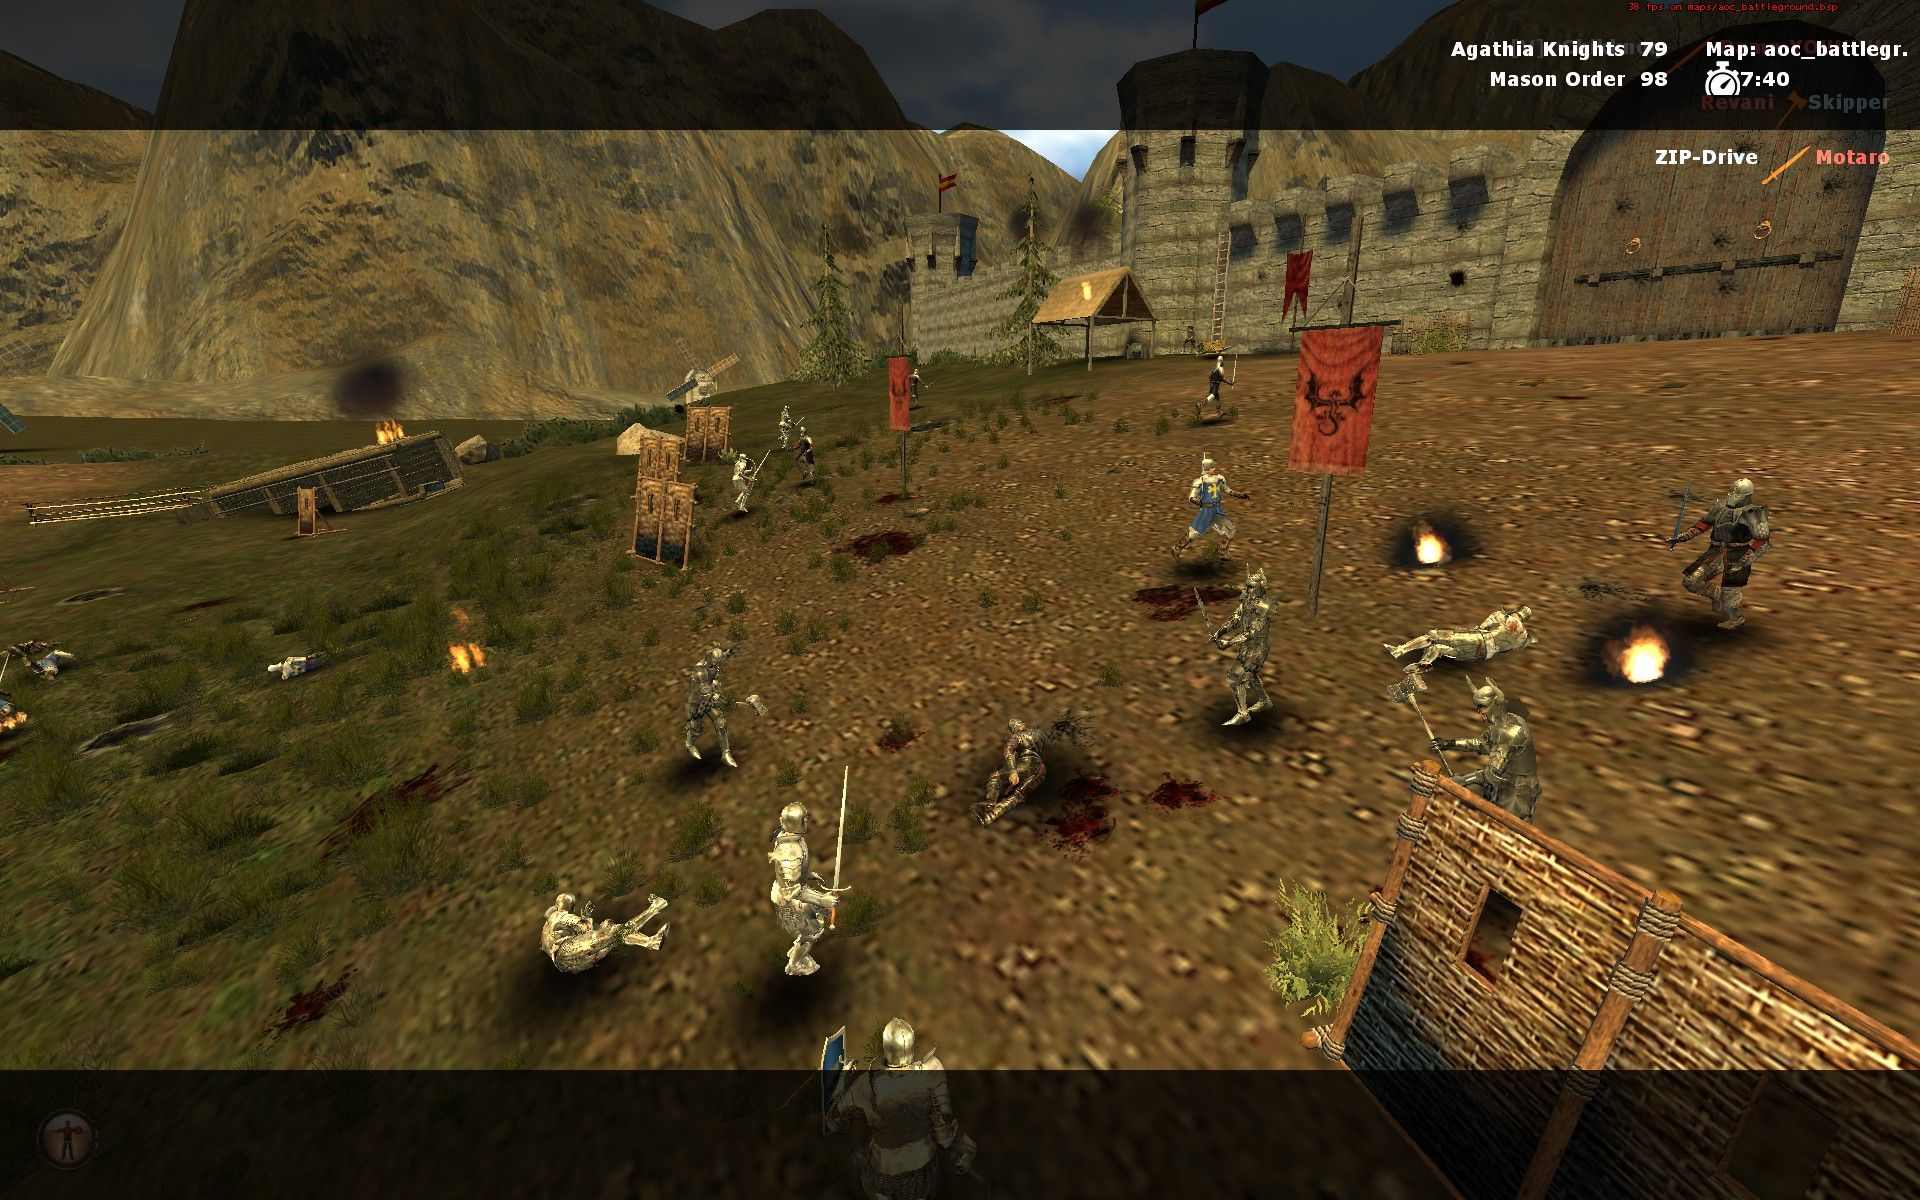 download free chivalry 2 gameplay pc